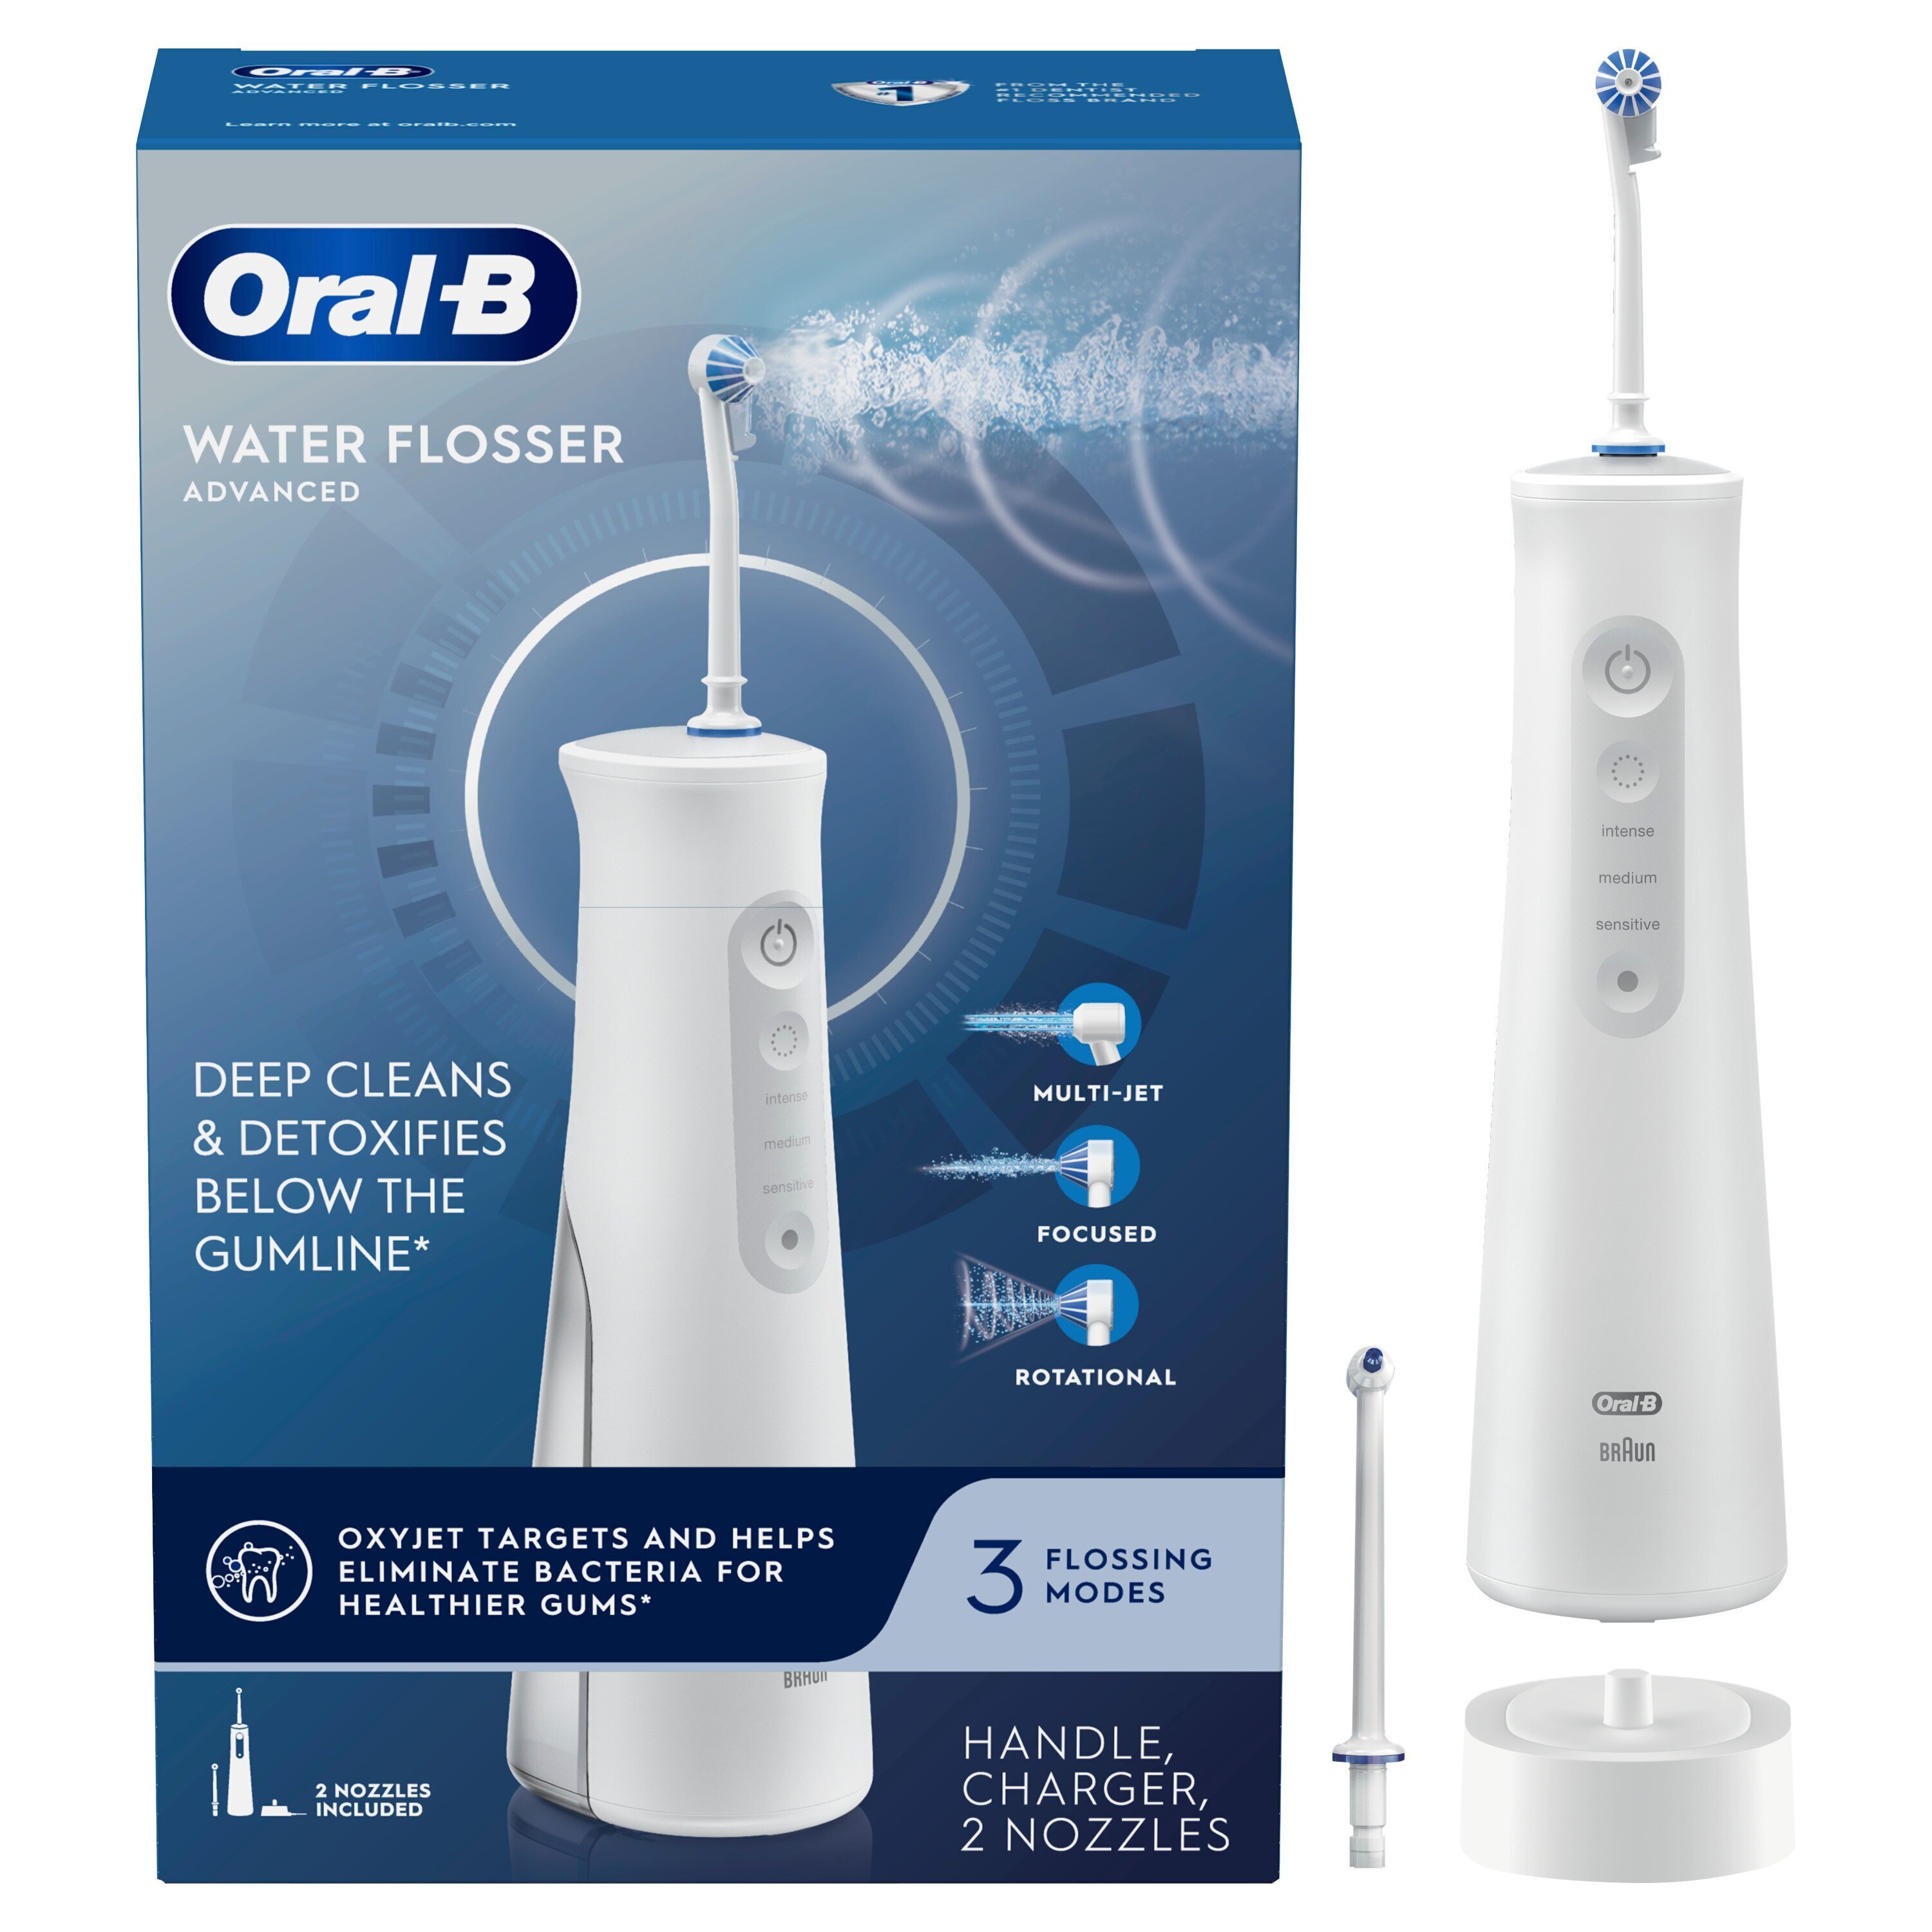 Oral-B Water Flosser Advanced, Portable Oral Irrigator Handle with 2 Nozzles